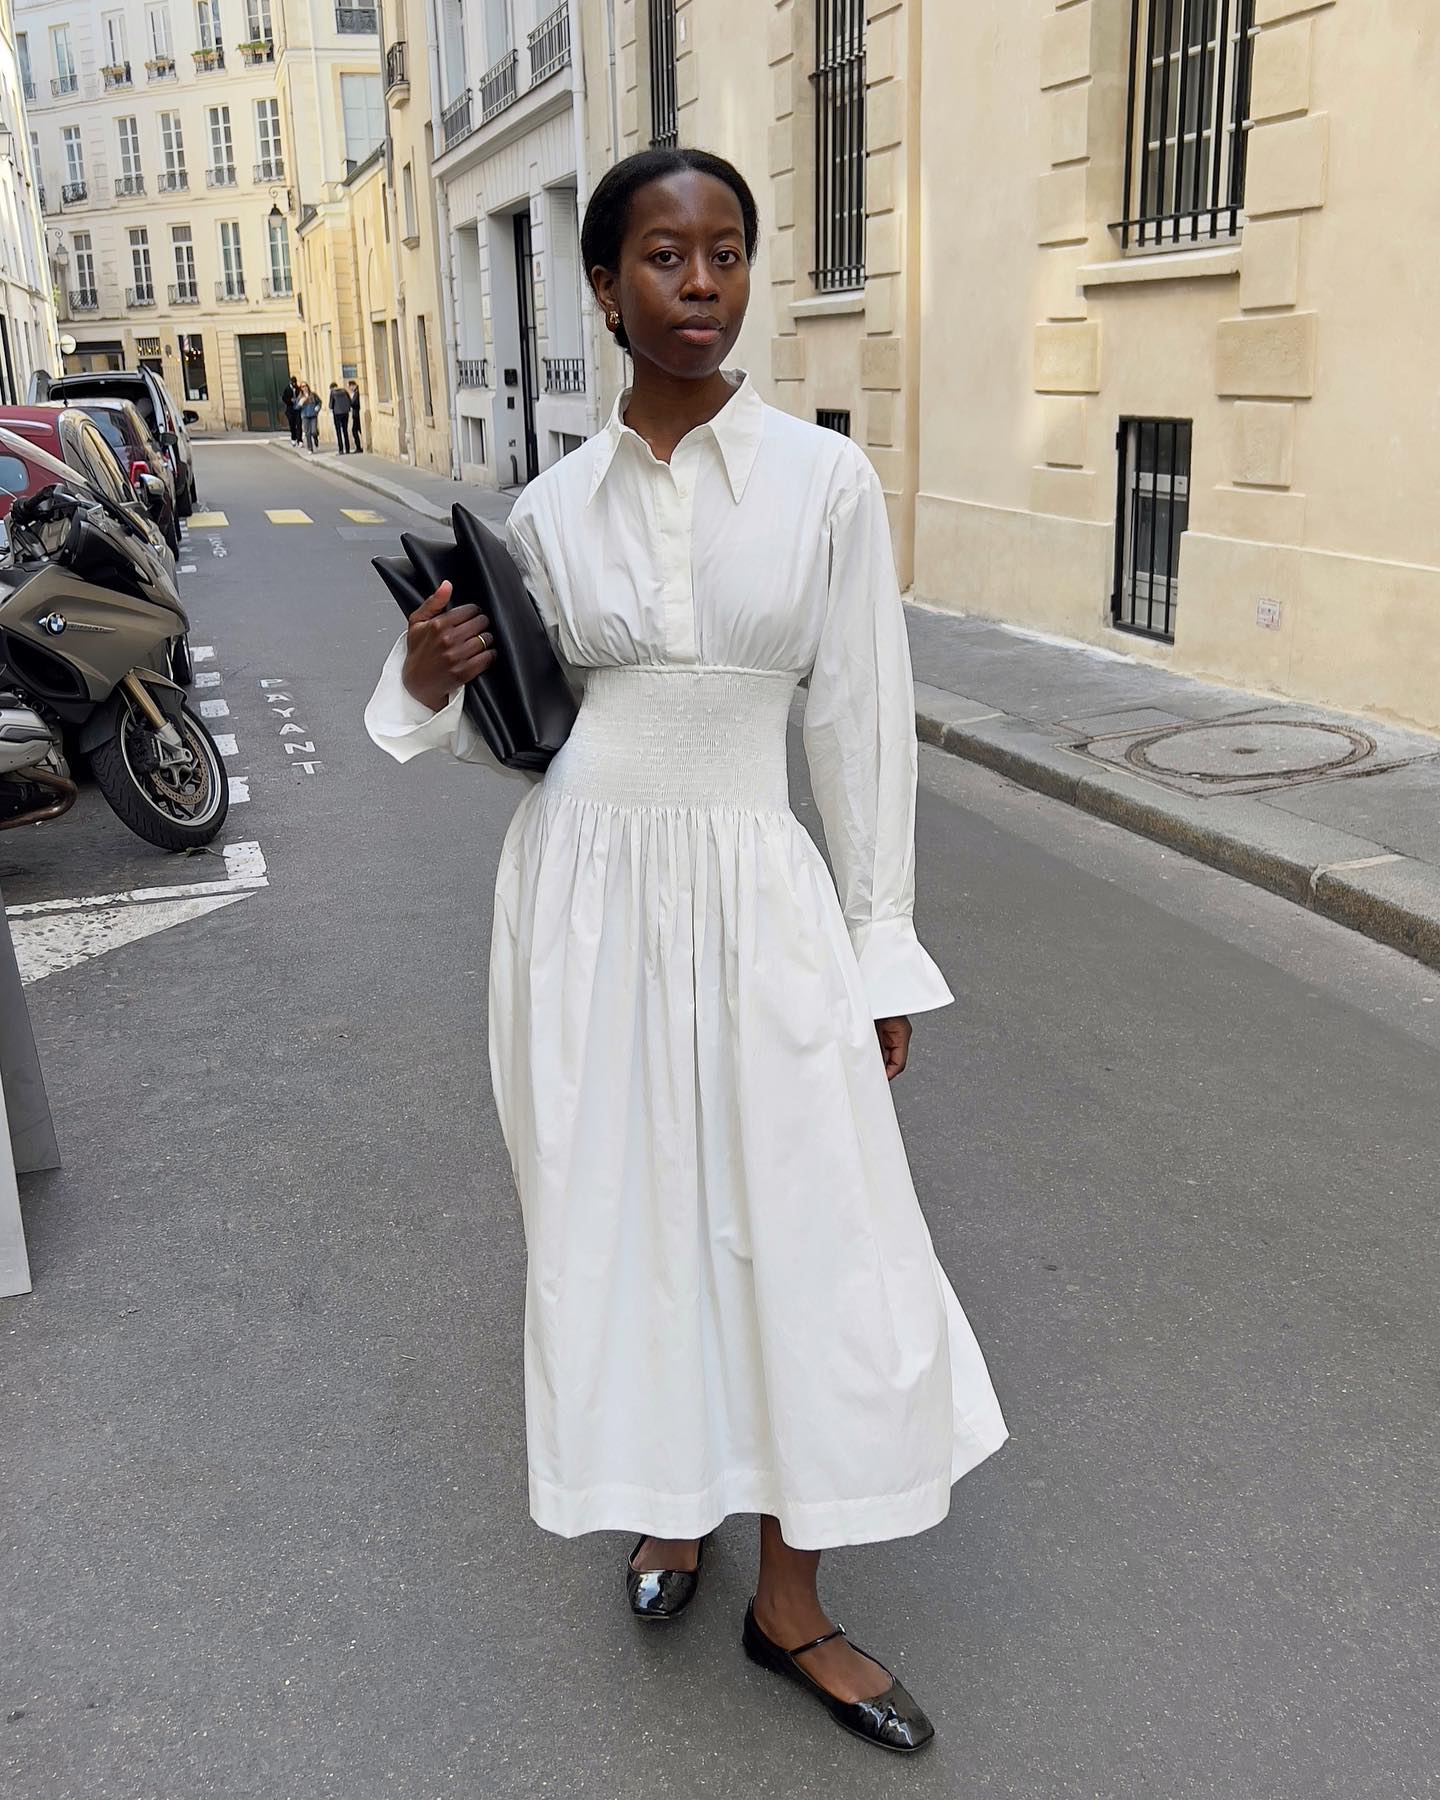 Woman wearing a white shirtdress and Mary Janes